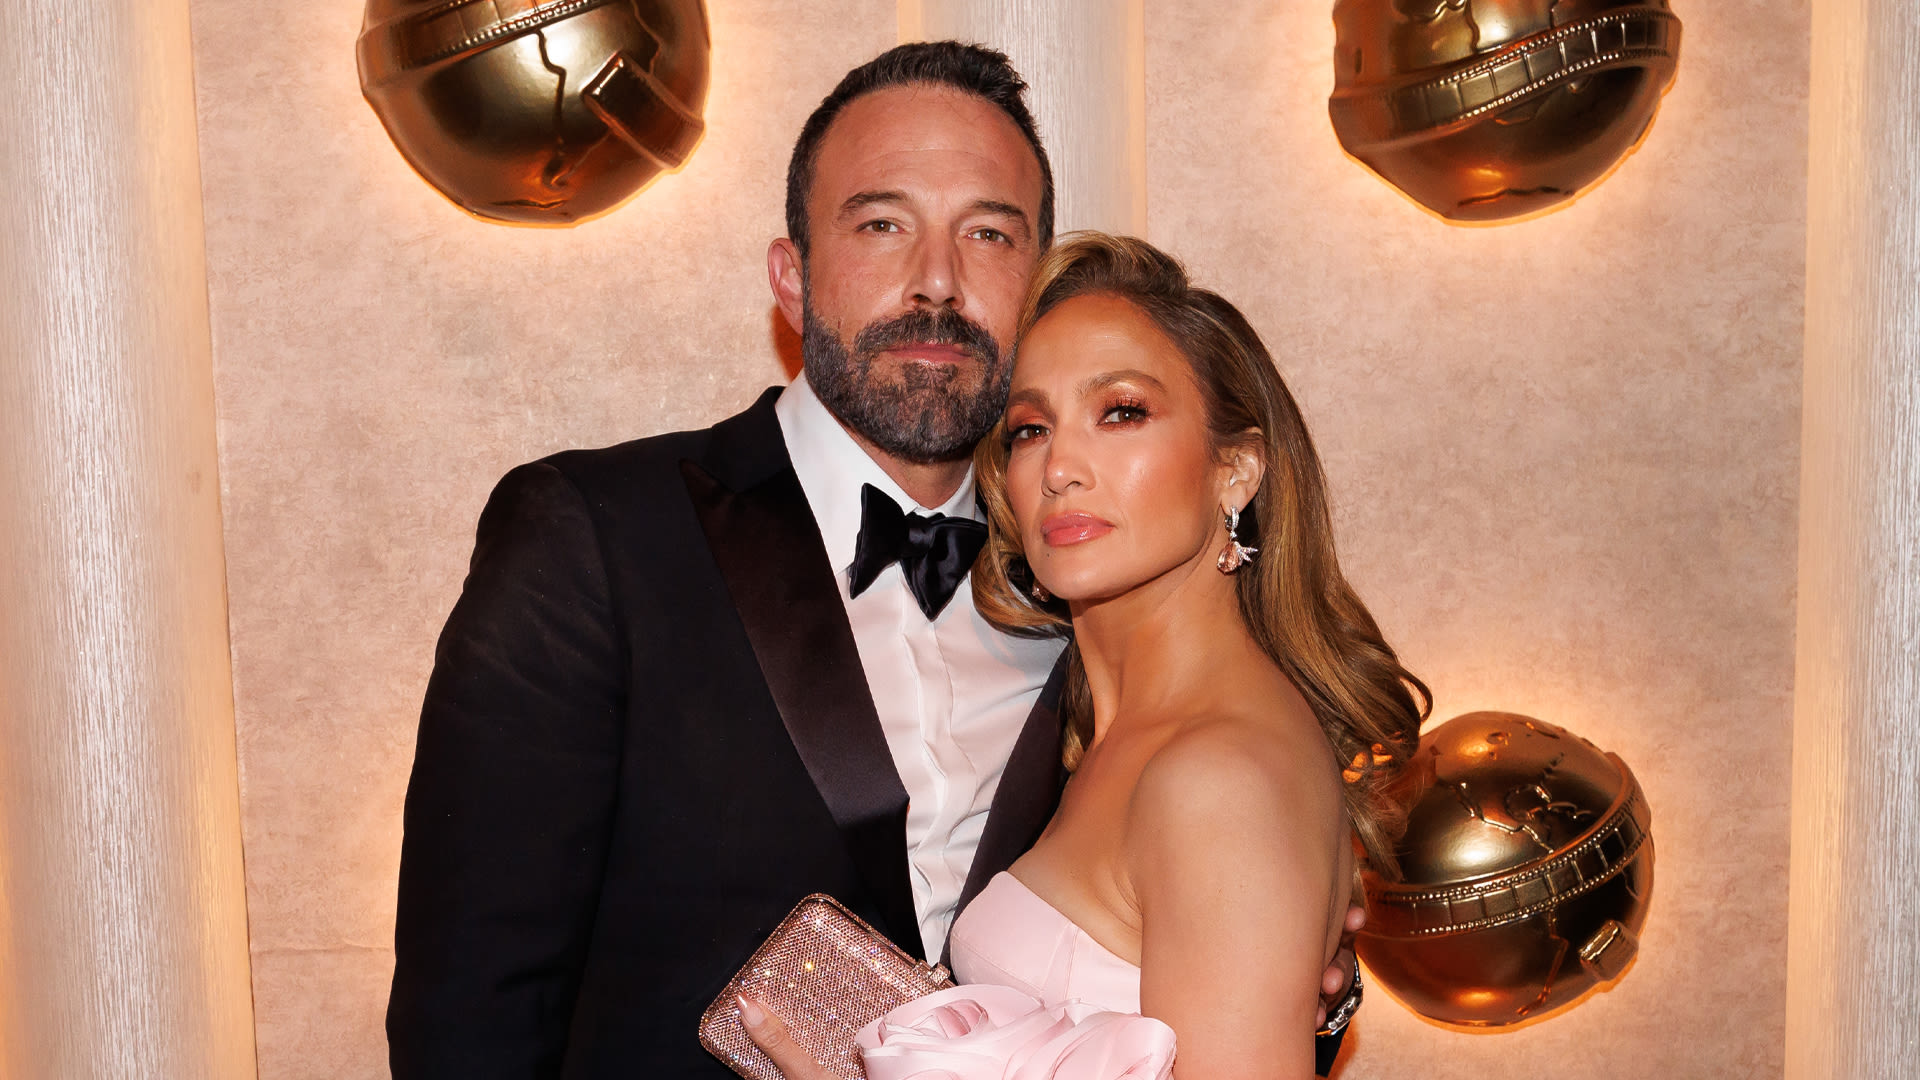 Jennifer Lopez and Ben Affleck's marriage rules revealed as divorce rumors swirl